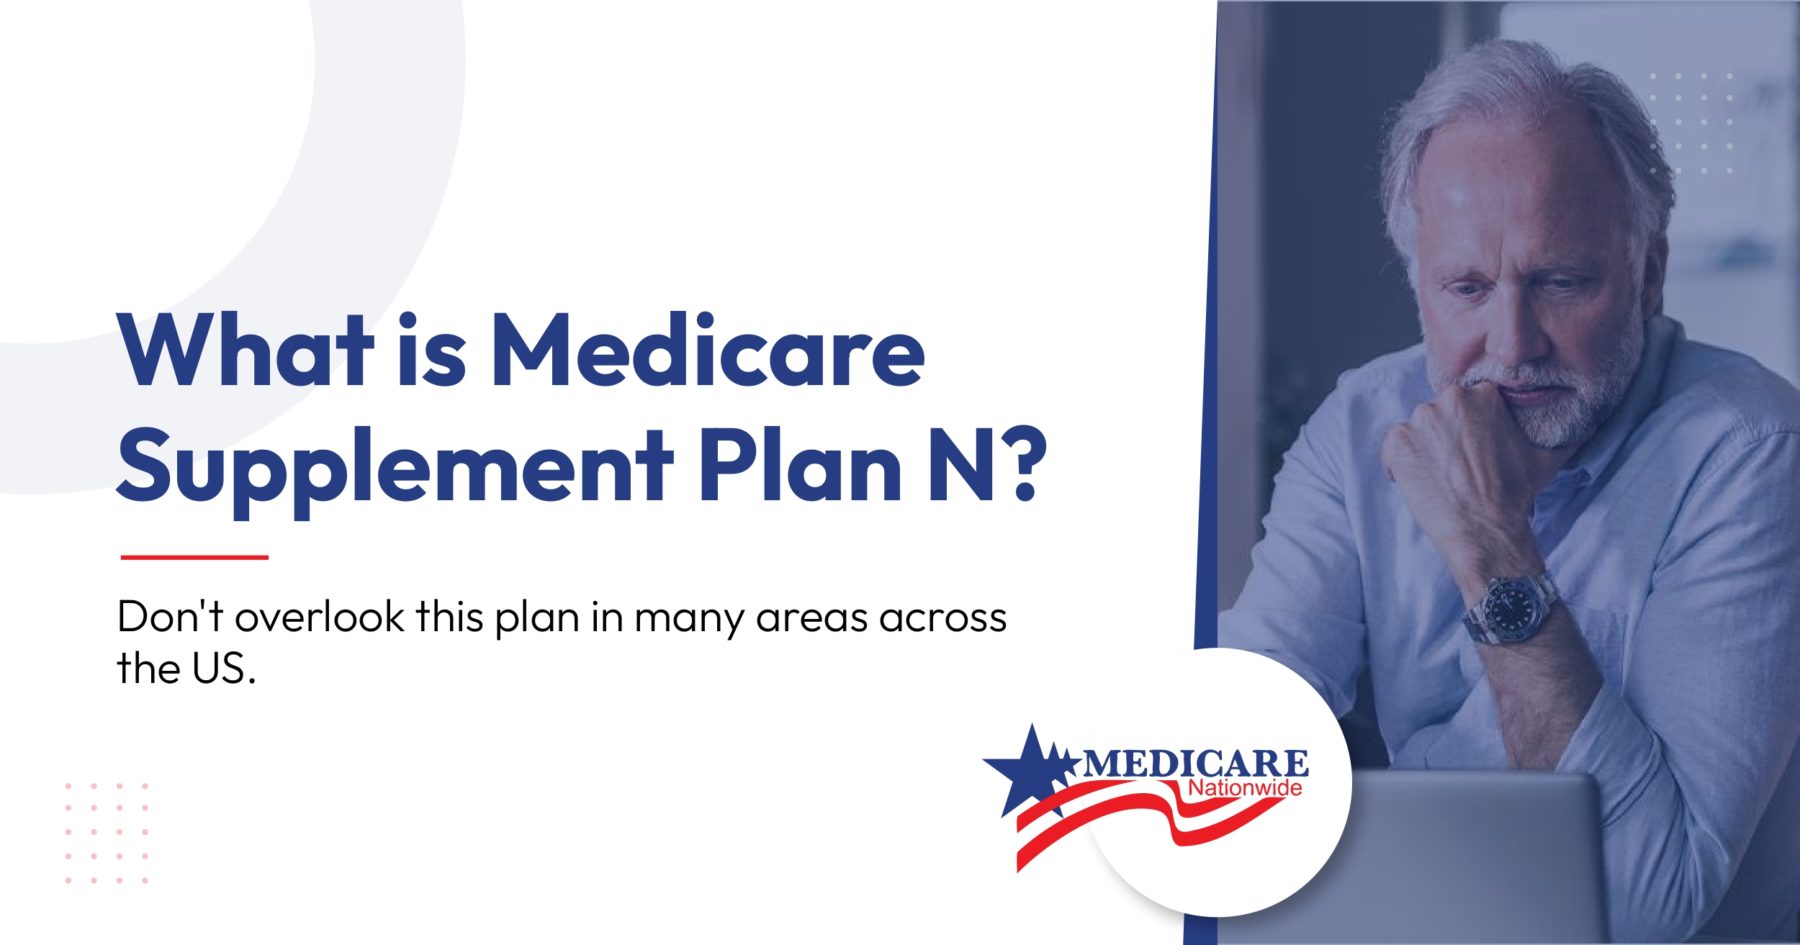 What is Medicare Supplement Plan N?